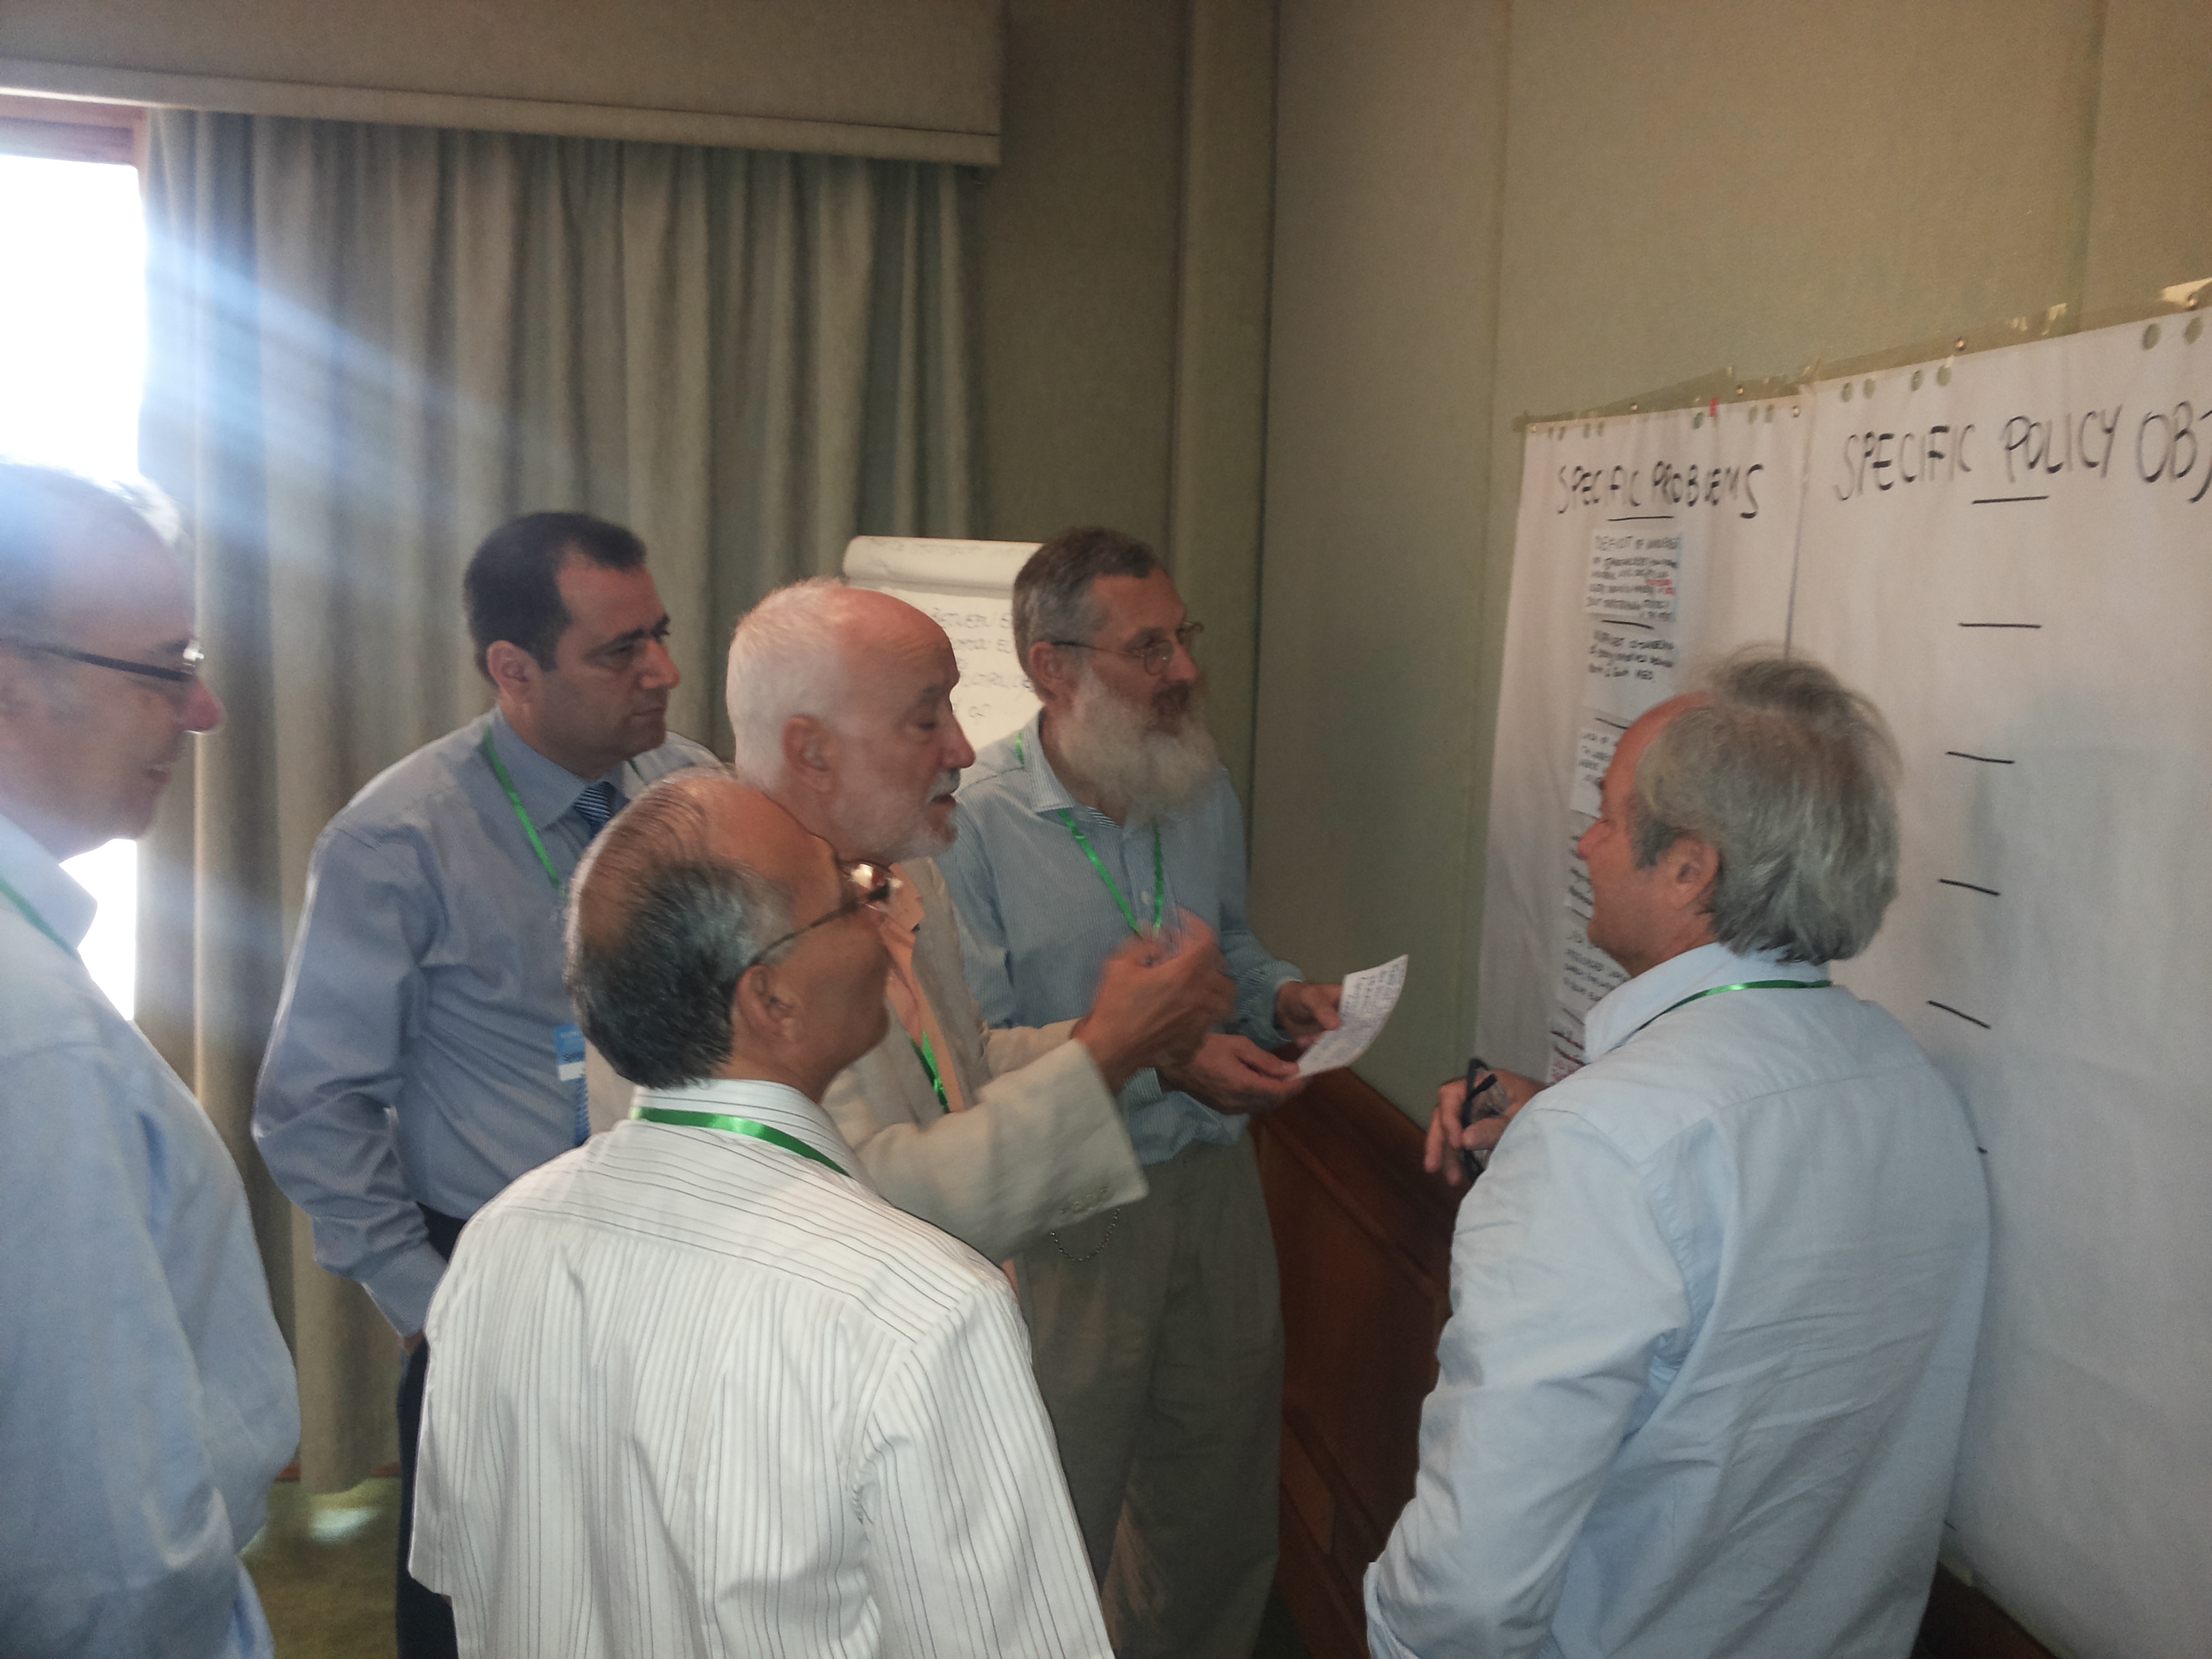 Workshop on ENERGY: identifying specific policy objectives